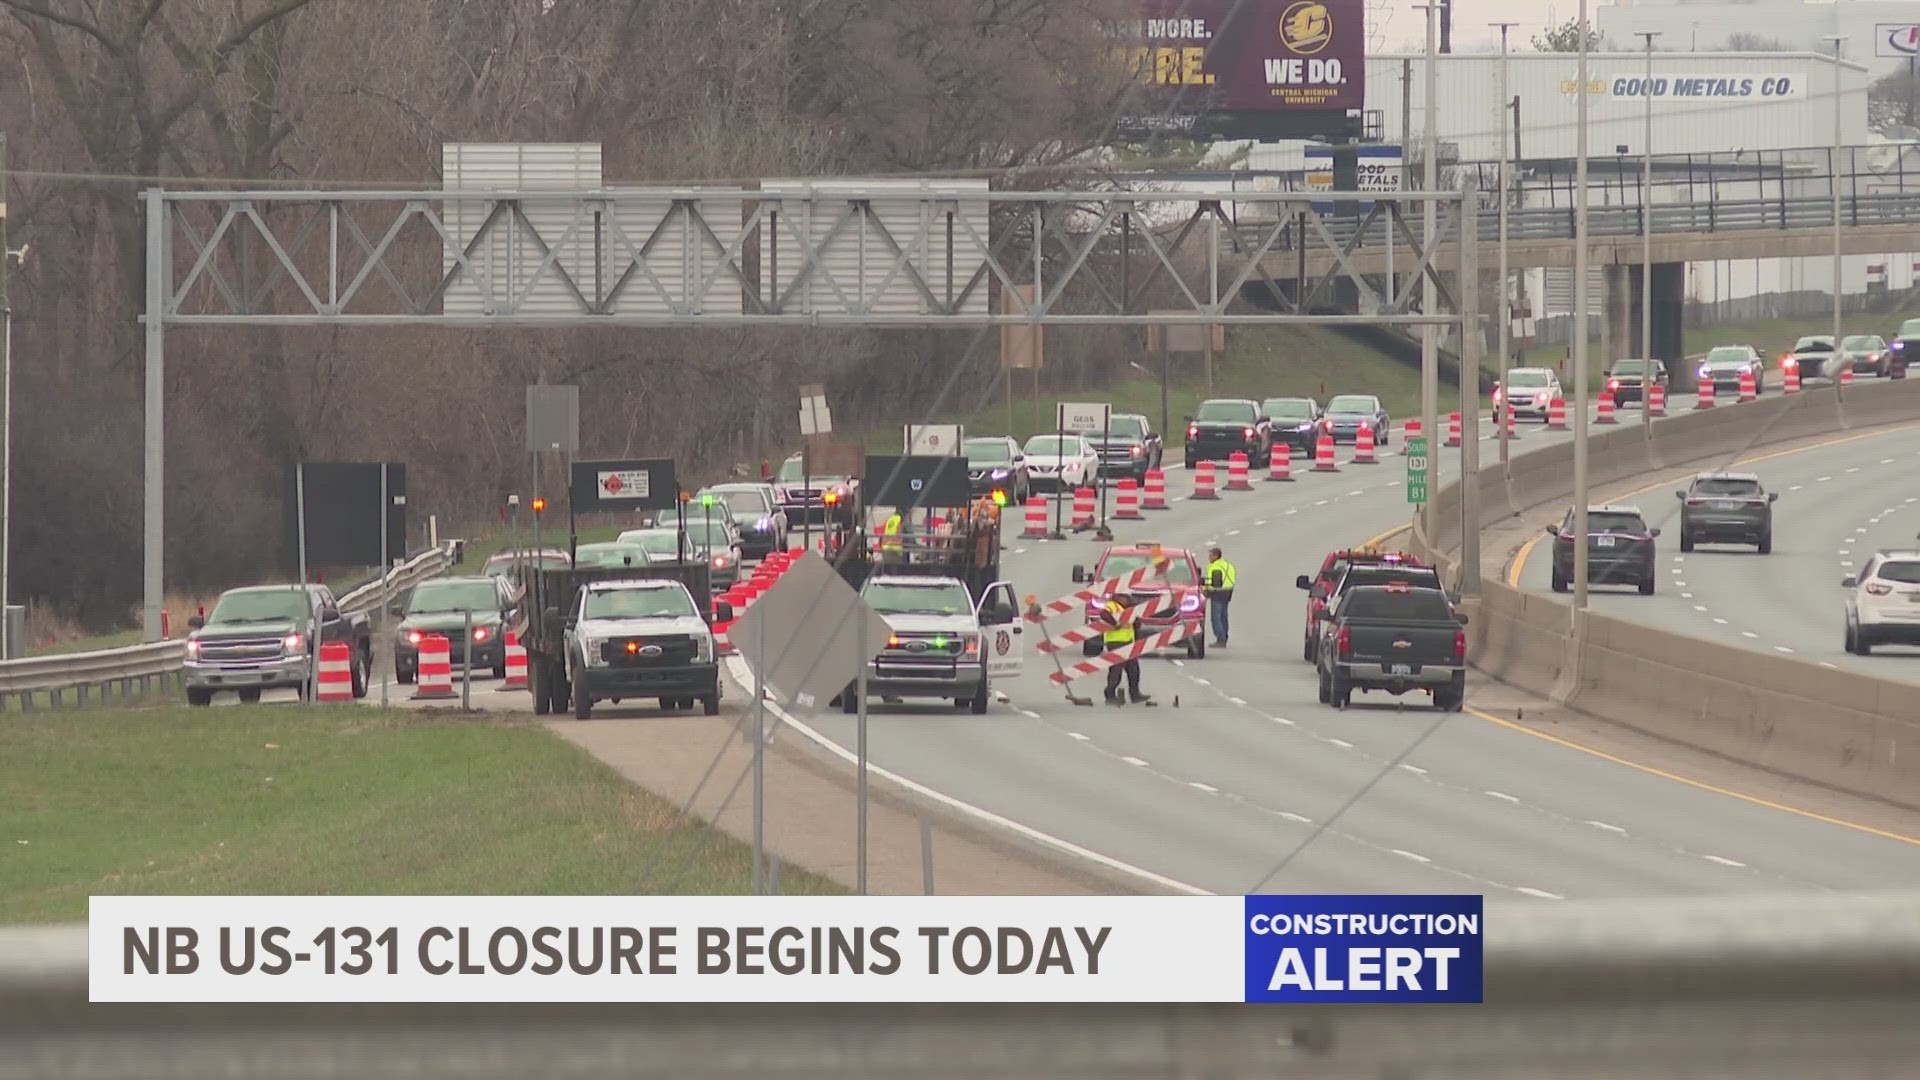 Northbound US-131 will be completely closed from 28th Street to Burton Street until April 25. Traffic must exit at or before 28th Street (M-11).